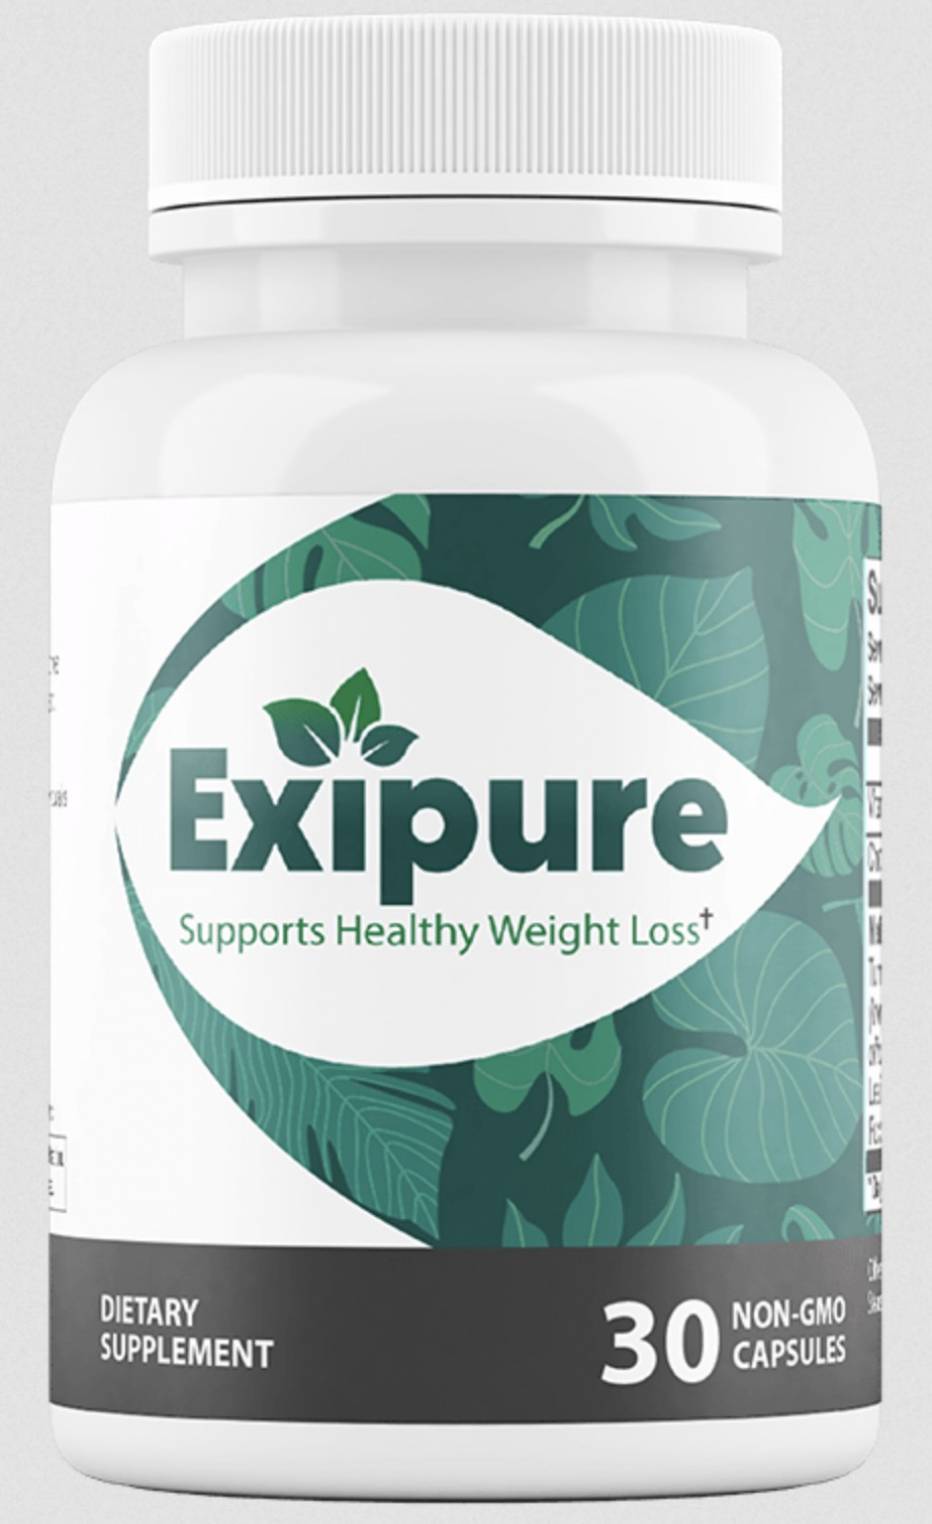 Customer review of Exipure